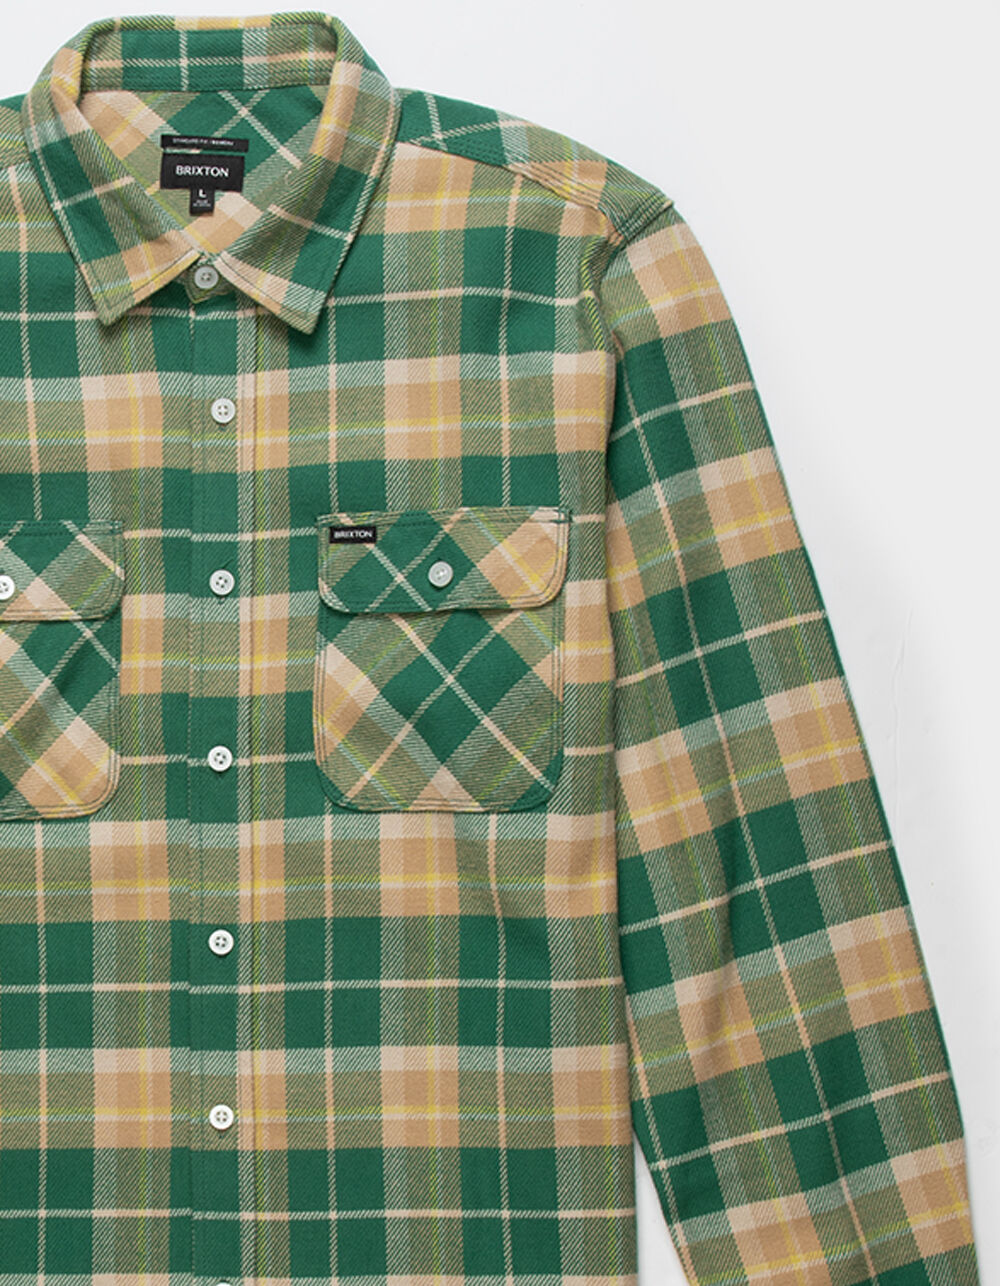 Bowery L/S Flannel - Washed Pine Needle/Washed Gold